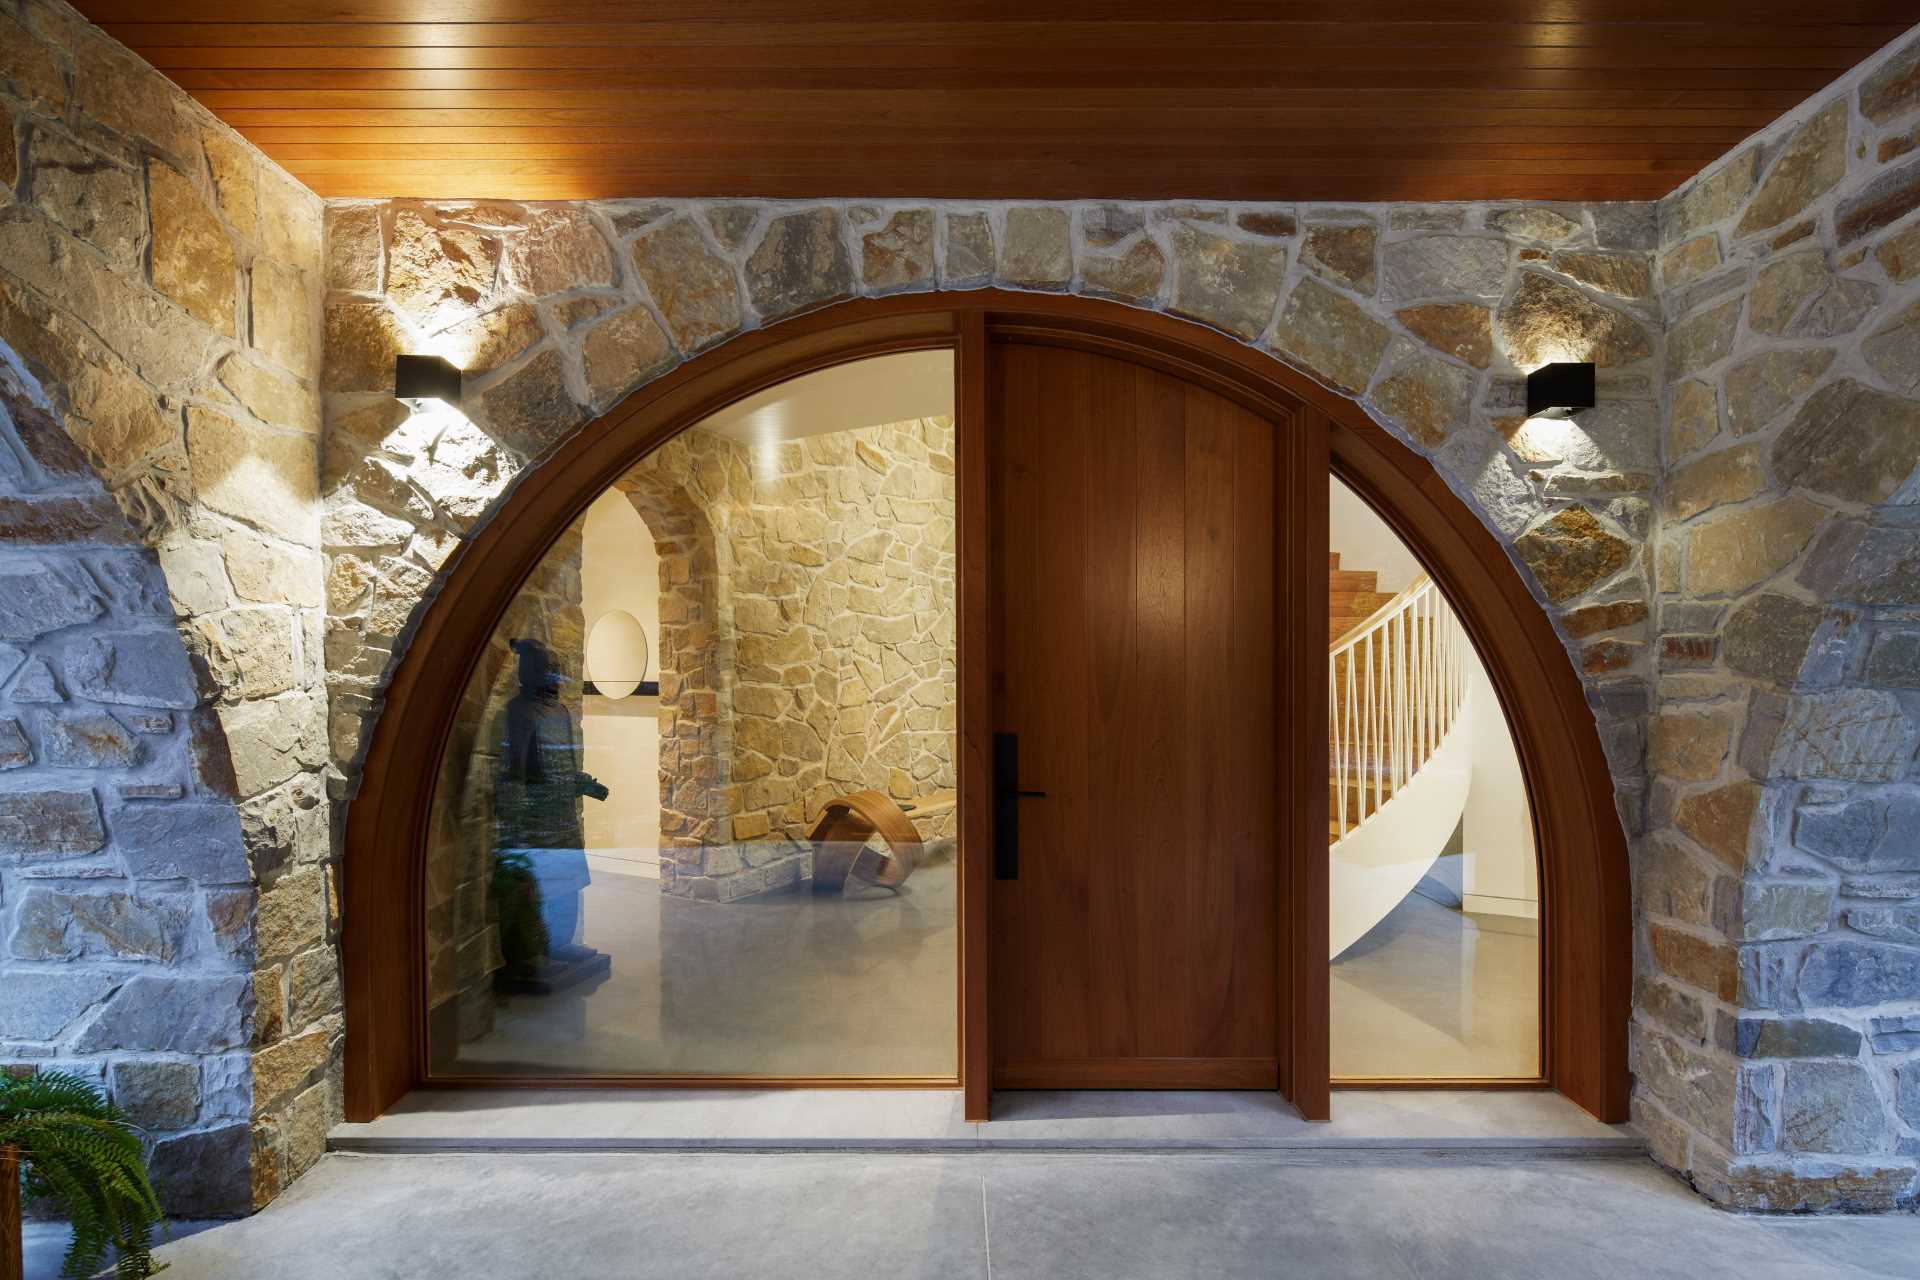 The stone, wood, and glass entrance is accessed through a covered outdoor space, sheltered from the elements, and arched on all four sides. 